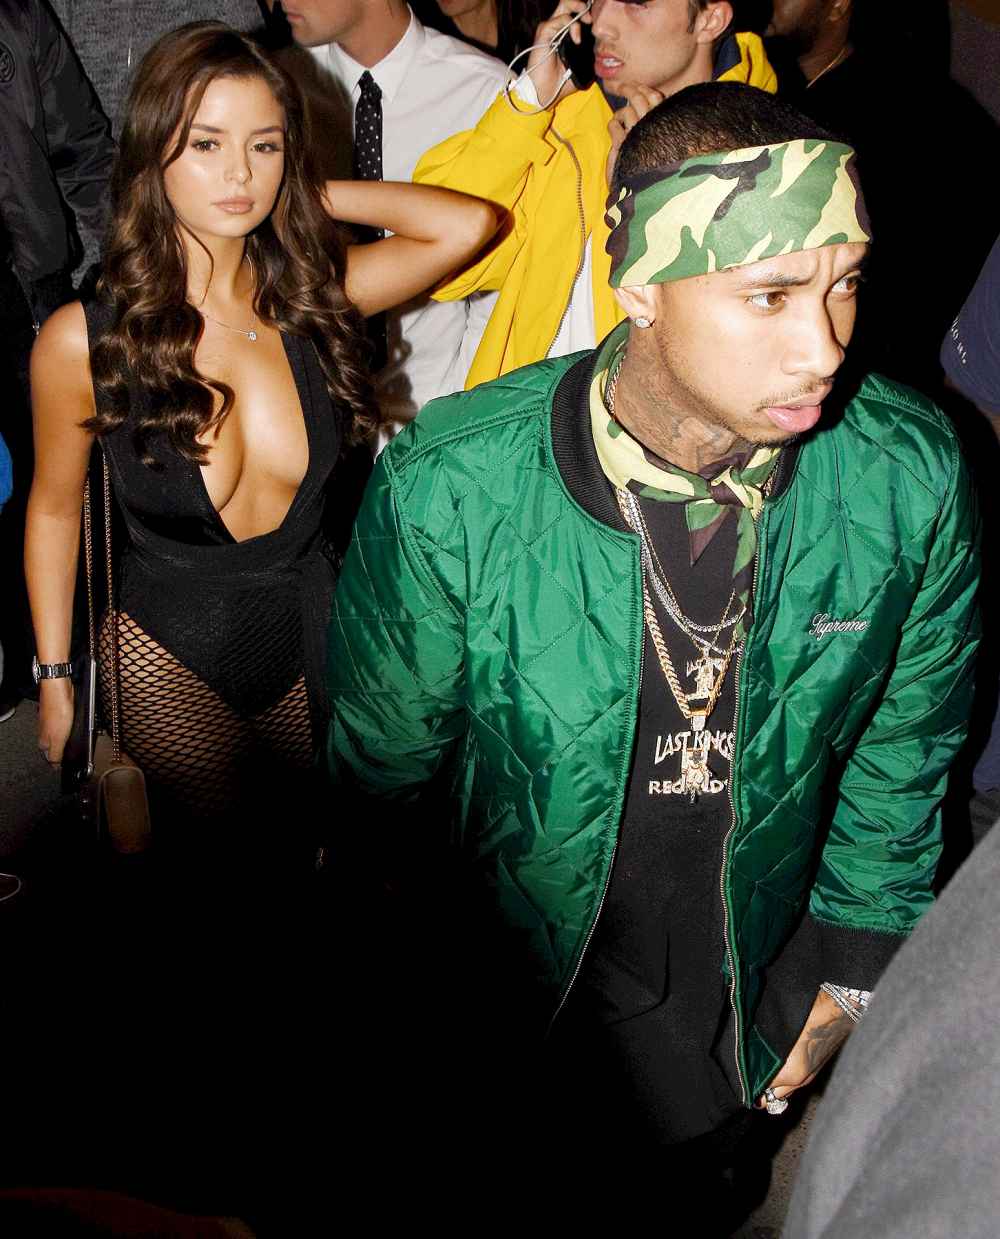 Tyga and new love, British model Demi Rose Mawby, leaving their hotel to attend the Tyga showcase at a Cannes nightclub.